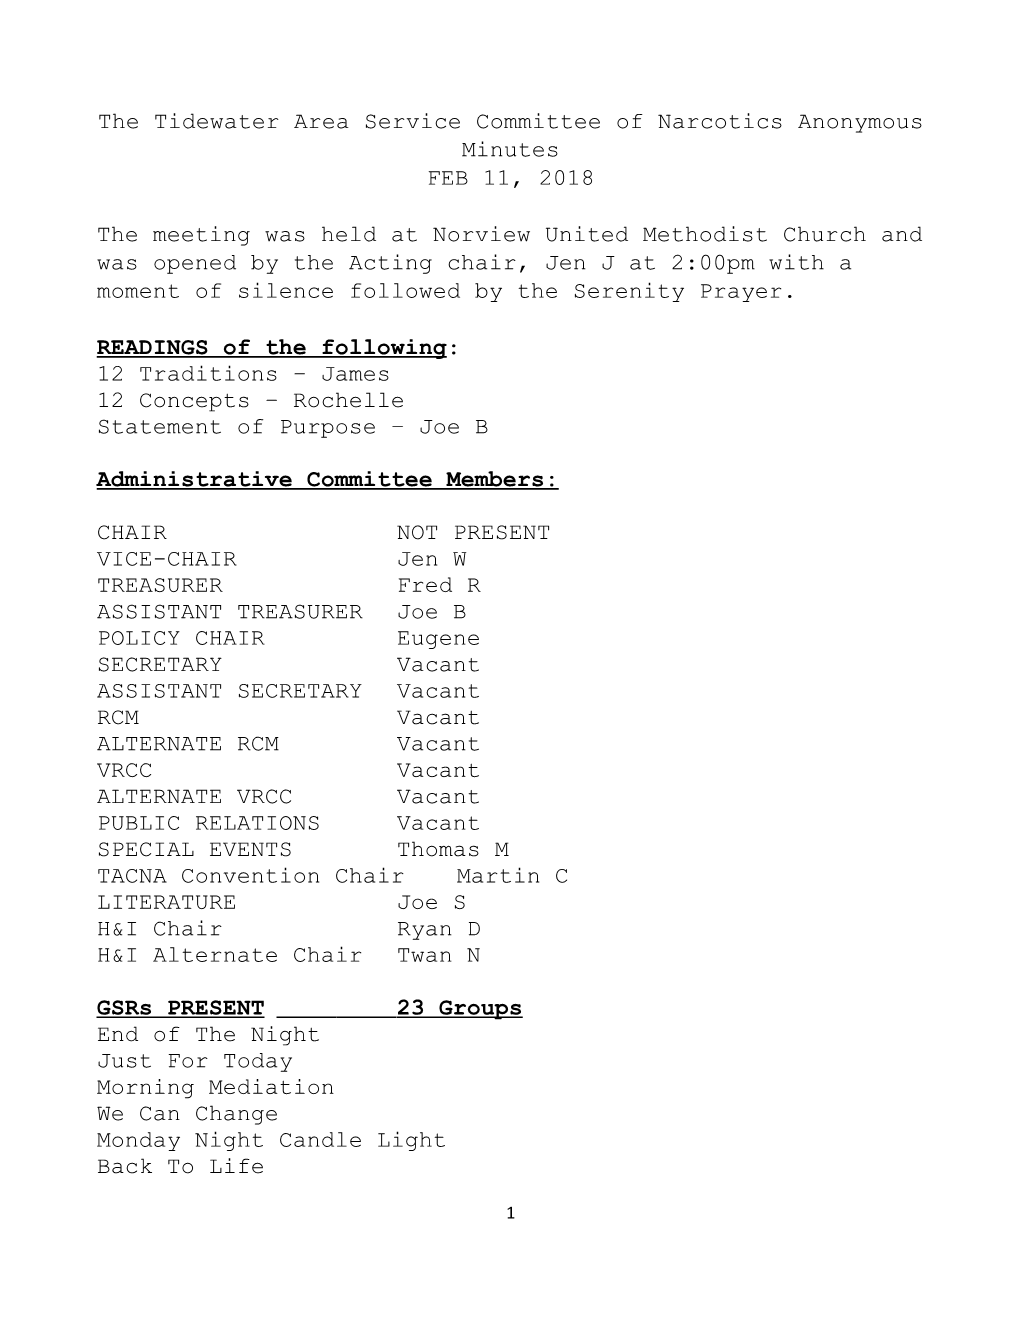 The Tidewater Area Service Committee of Narcotics Anonymous Minutes